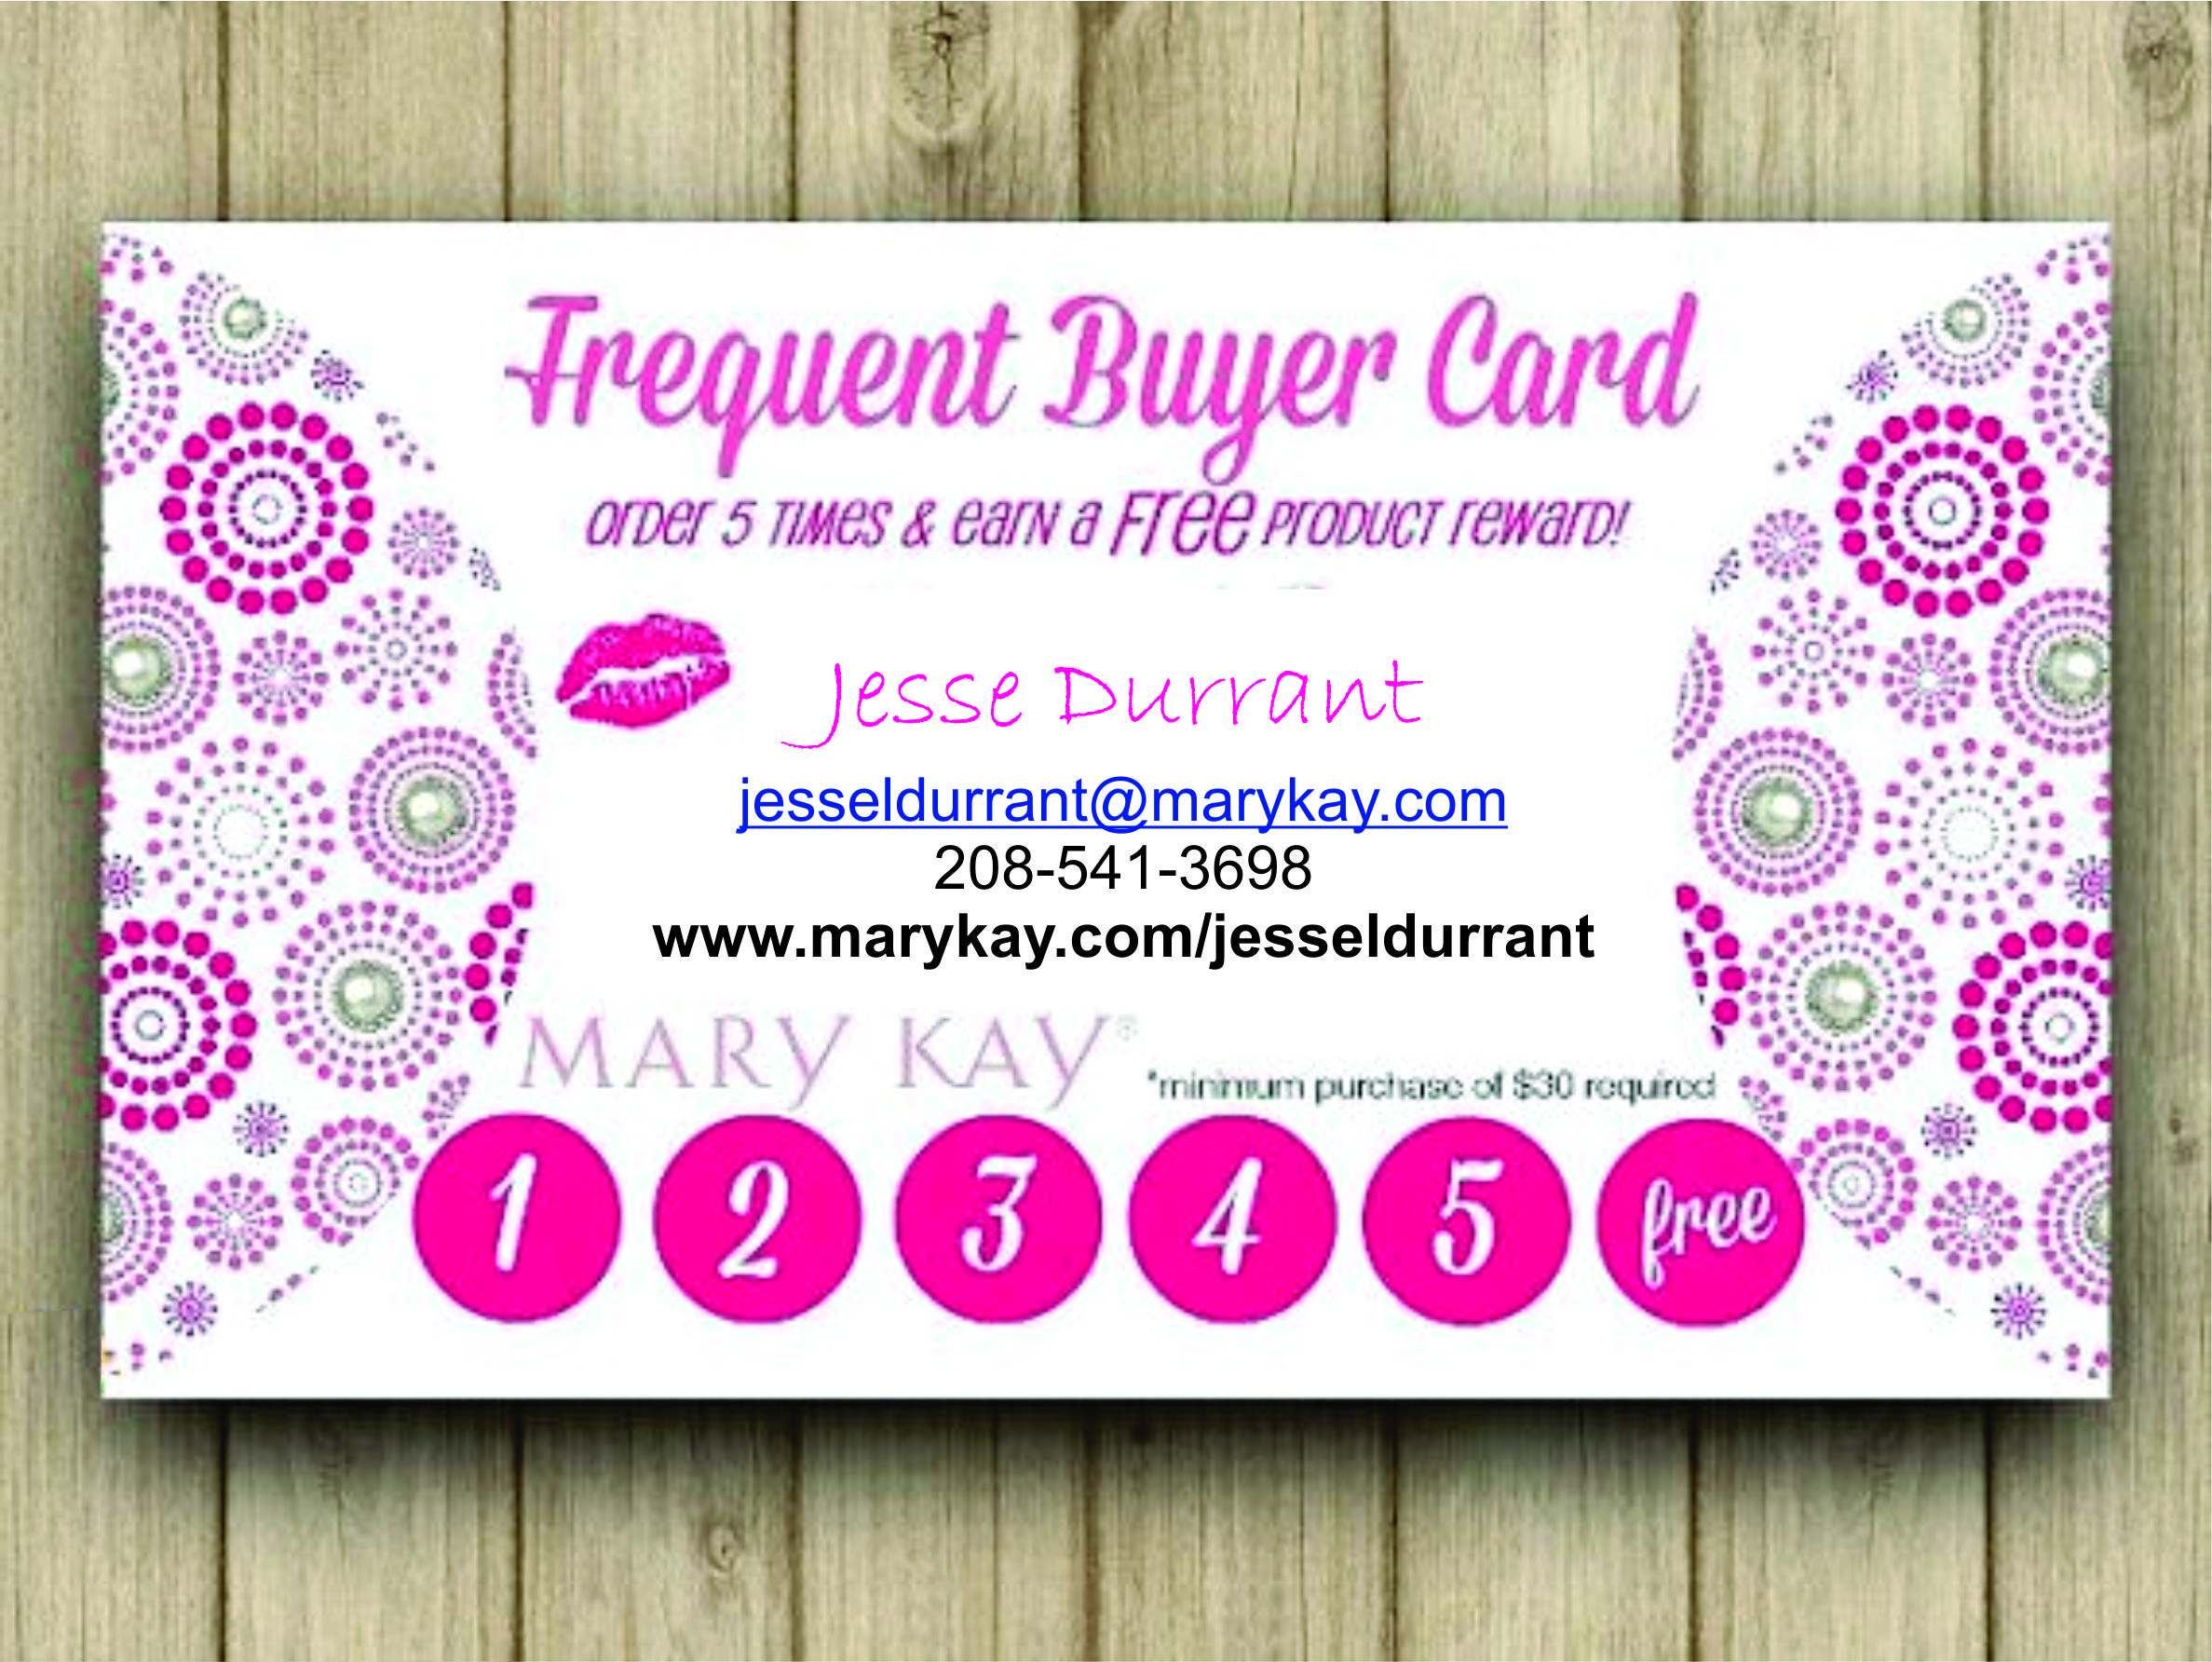 Frequent Buyer Card!!! Earn Free Product When You Register To Be A - Free Printable Mary Kay Business Cards